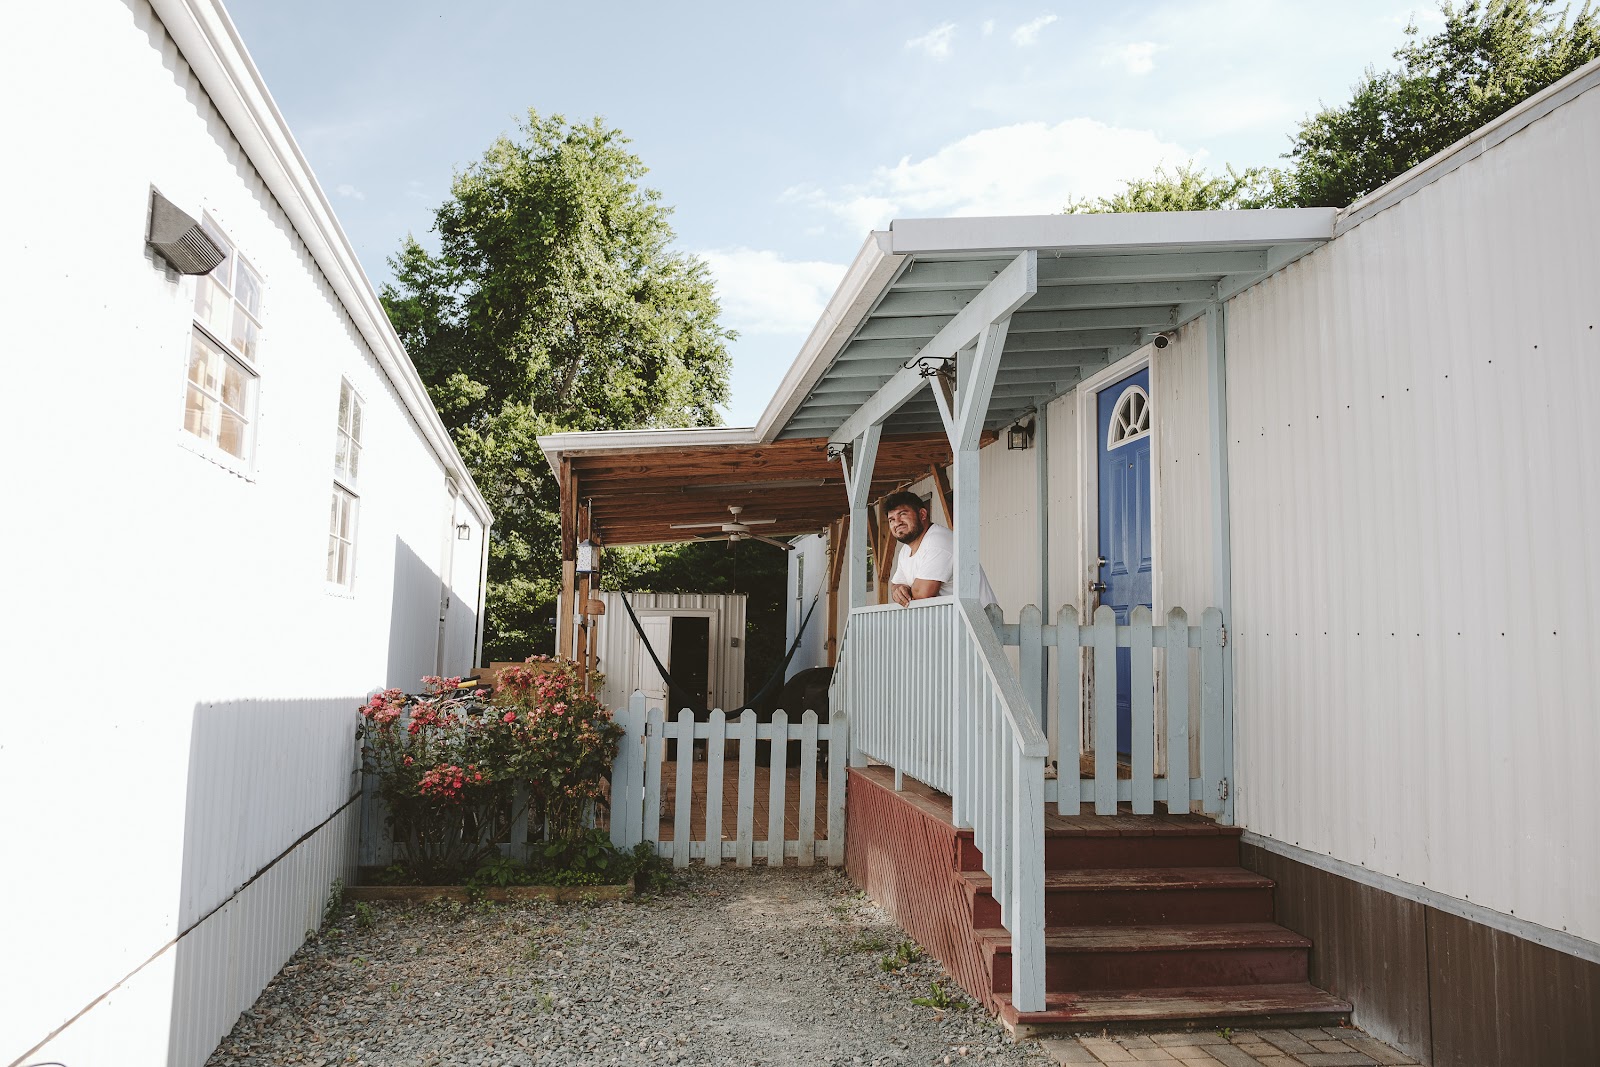 At the center of the image, a man stands leaning on a stairway railing, looking up toward the sky. To the left is a rose bush and a picket fence, and a covered patio with a hammock, a ceiling fan, and some chairs. To the right is his trailer home, with a brightly-colored door.